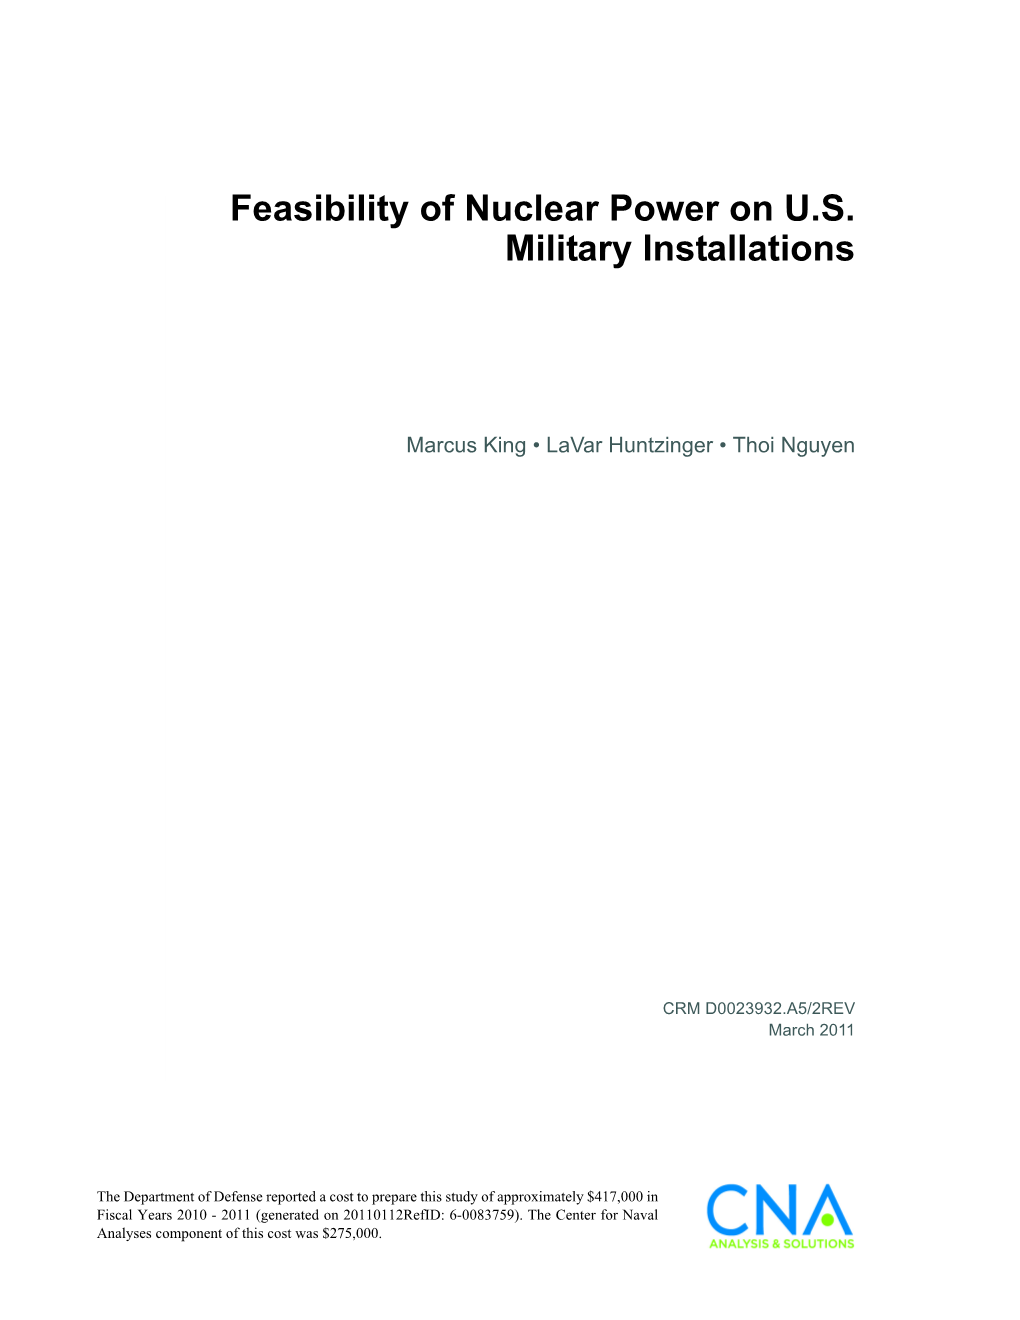 Feasibility of Nuclear Power on U.S. Military Installations